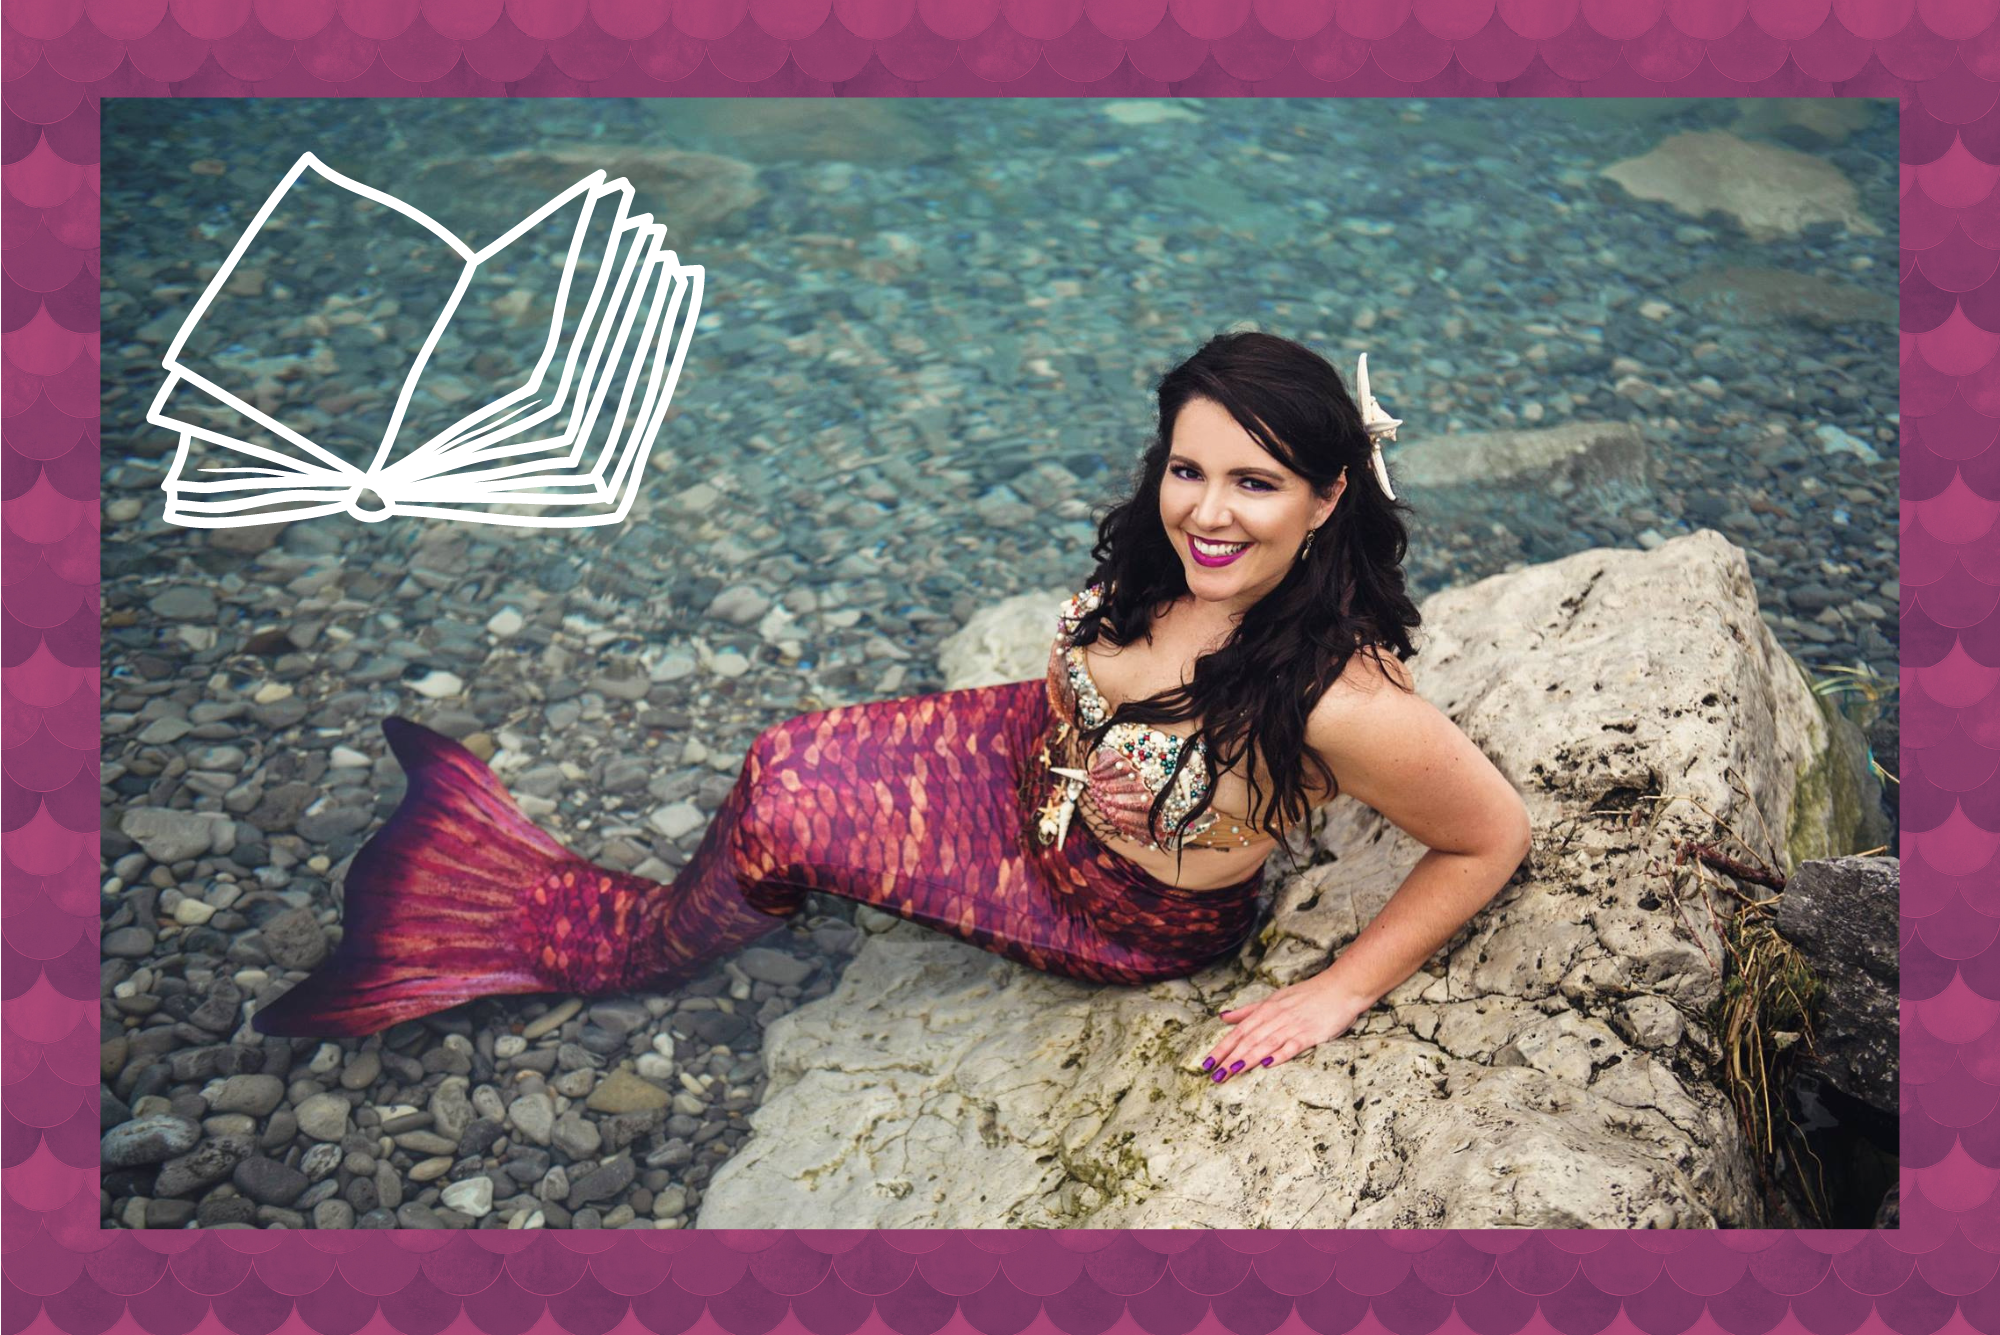 Image of woman in a Mermaid costume.